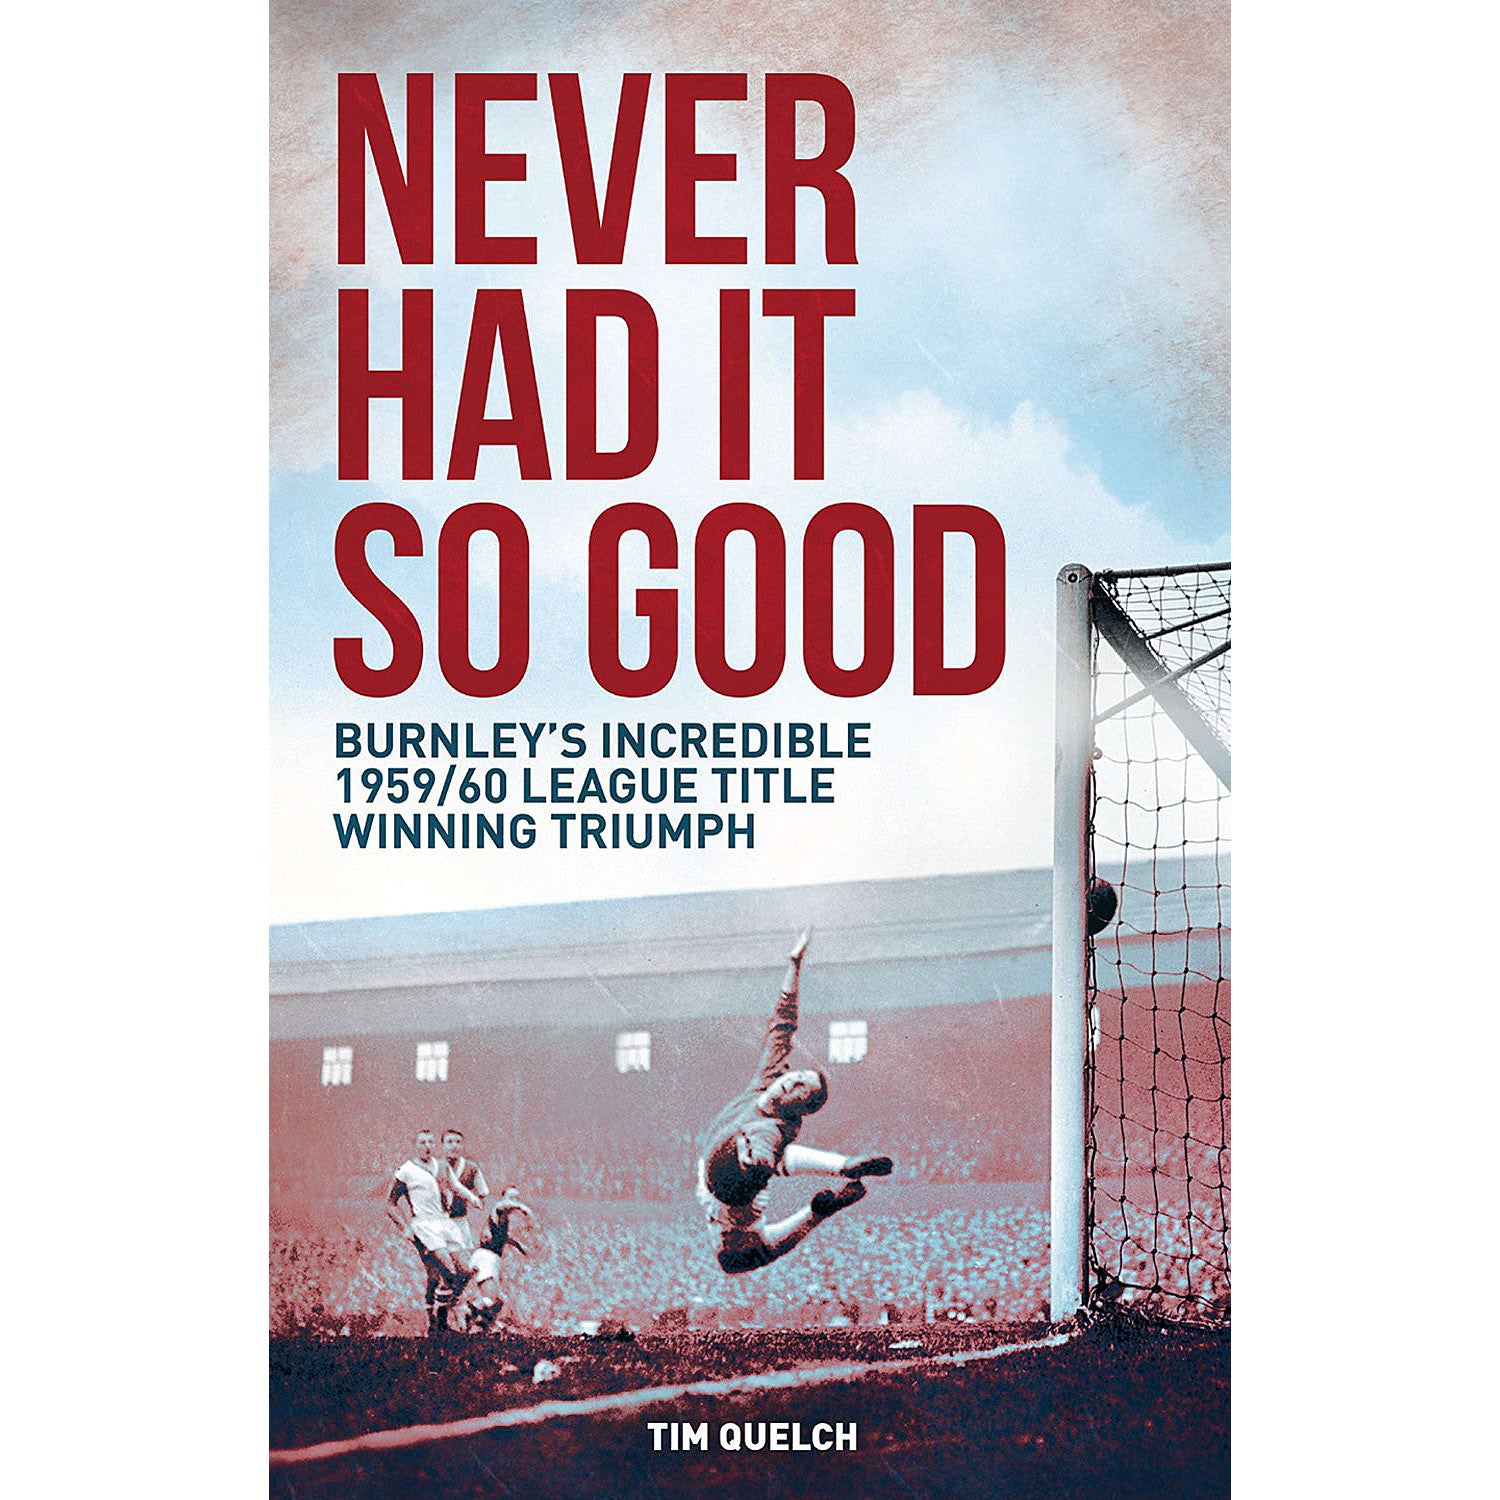 Never Had It So Good – Burnley's Incredible 1959/60 League Title Winning Triumph